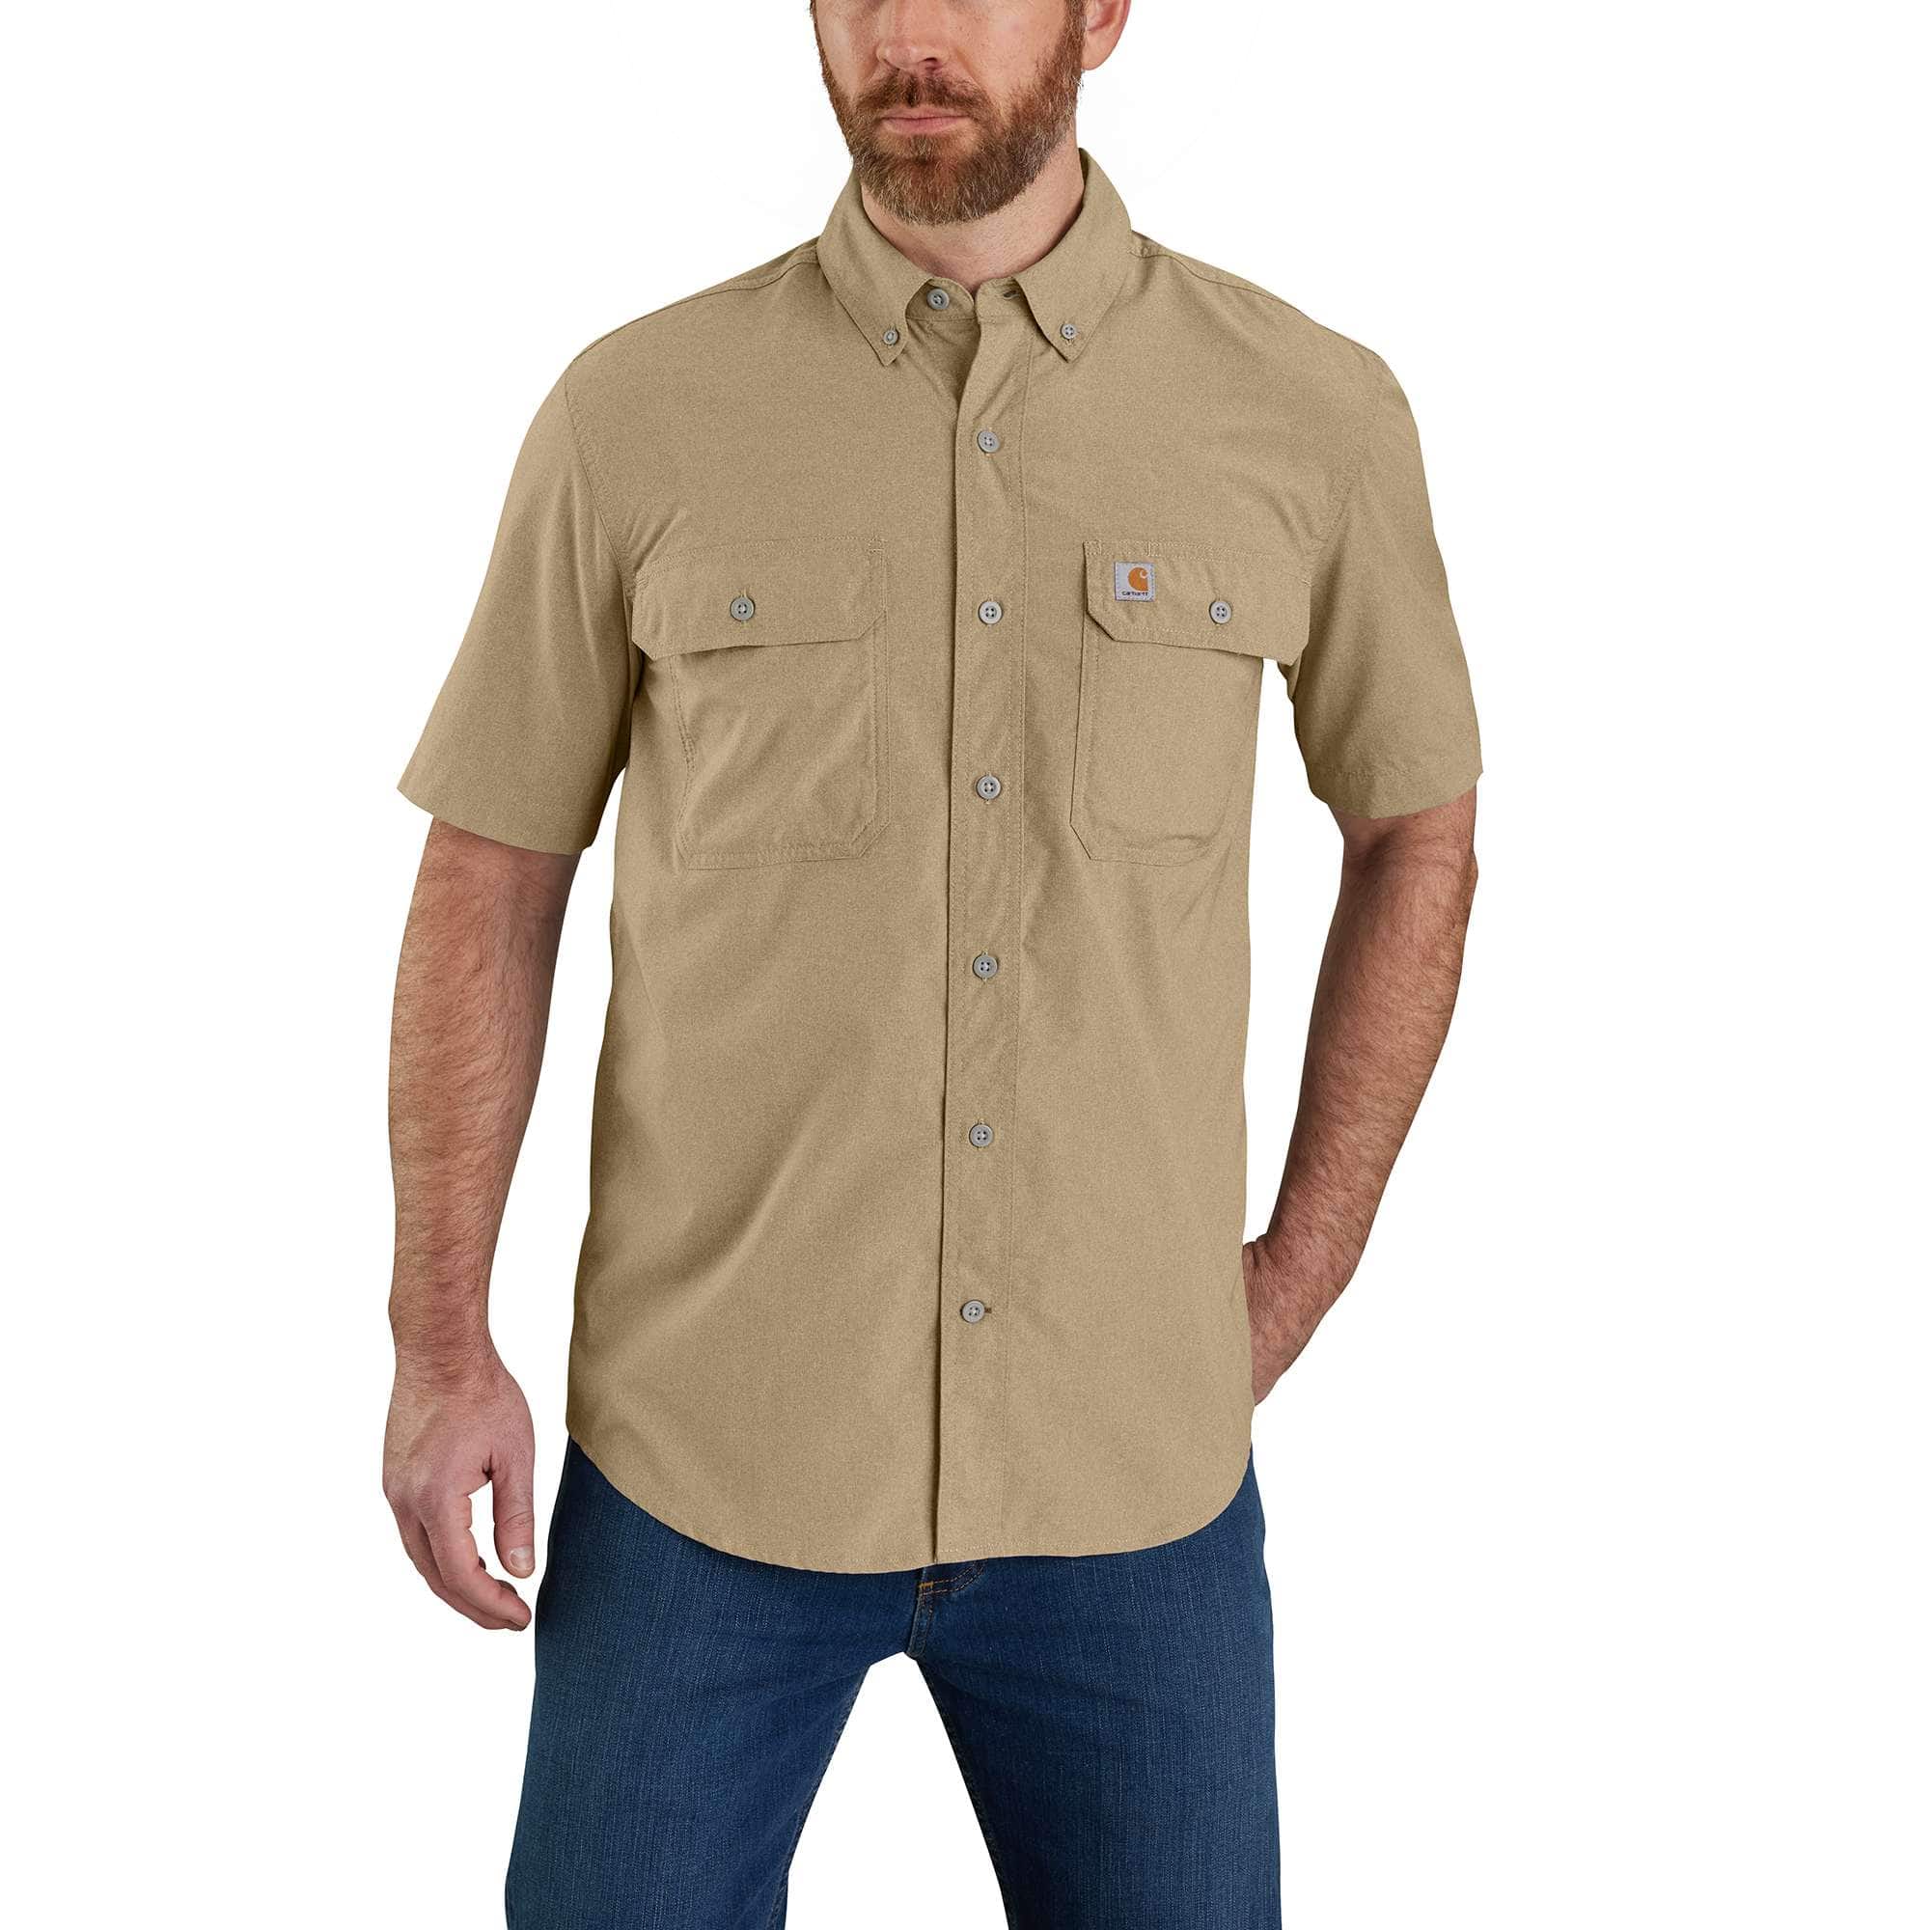 Own Father's Day: Take 25% Off Carhartt Force Shirts, Pants, and